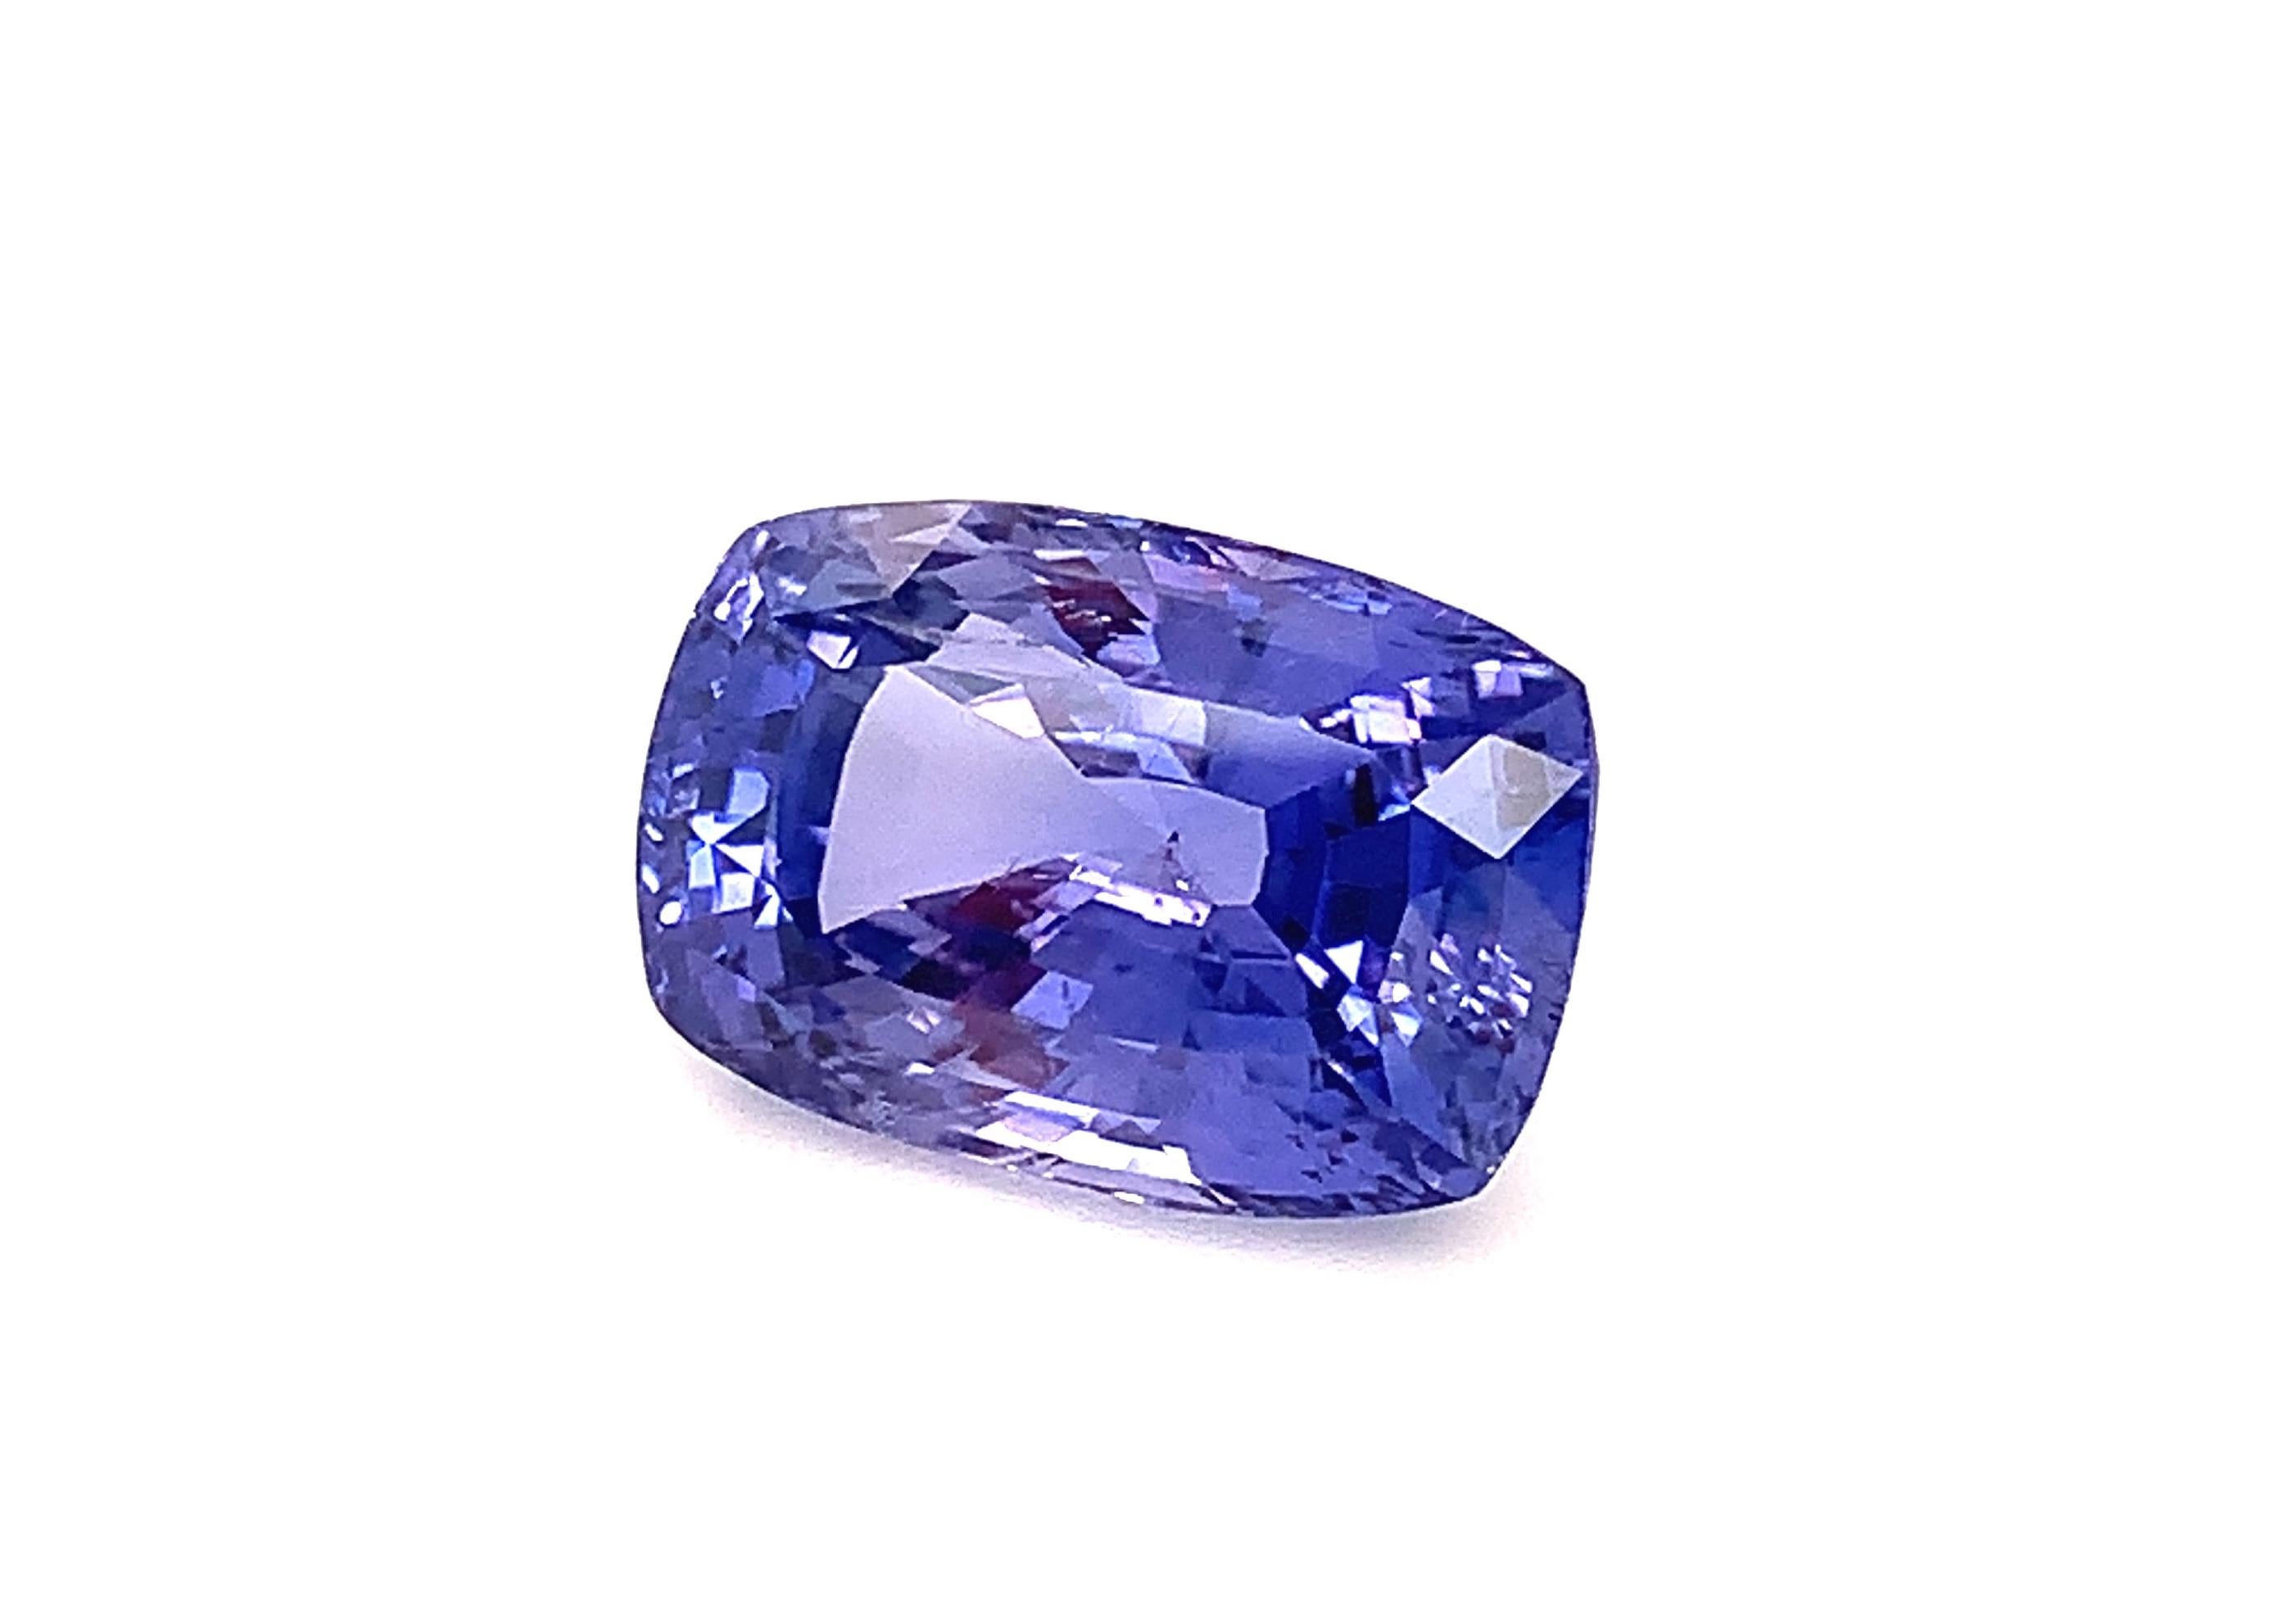 Unheated 29.45 Carat Blue Violet Sapphire, Loose Gemstone, GIA Certified 3